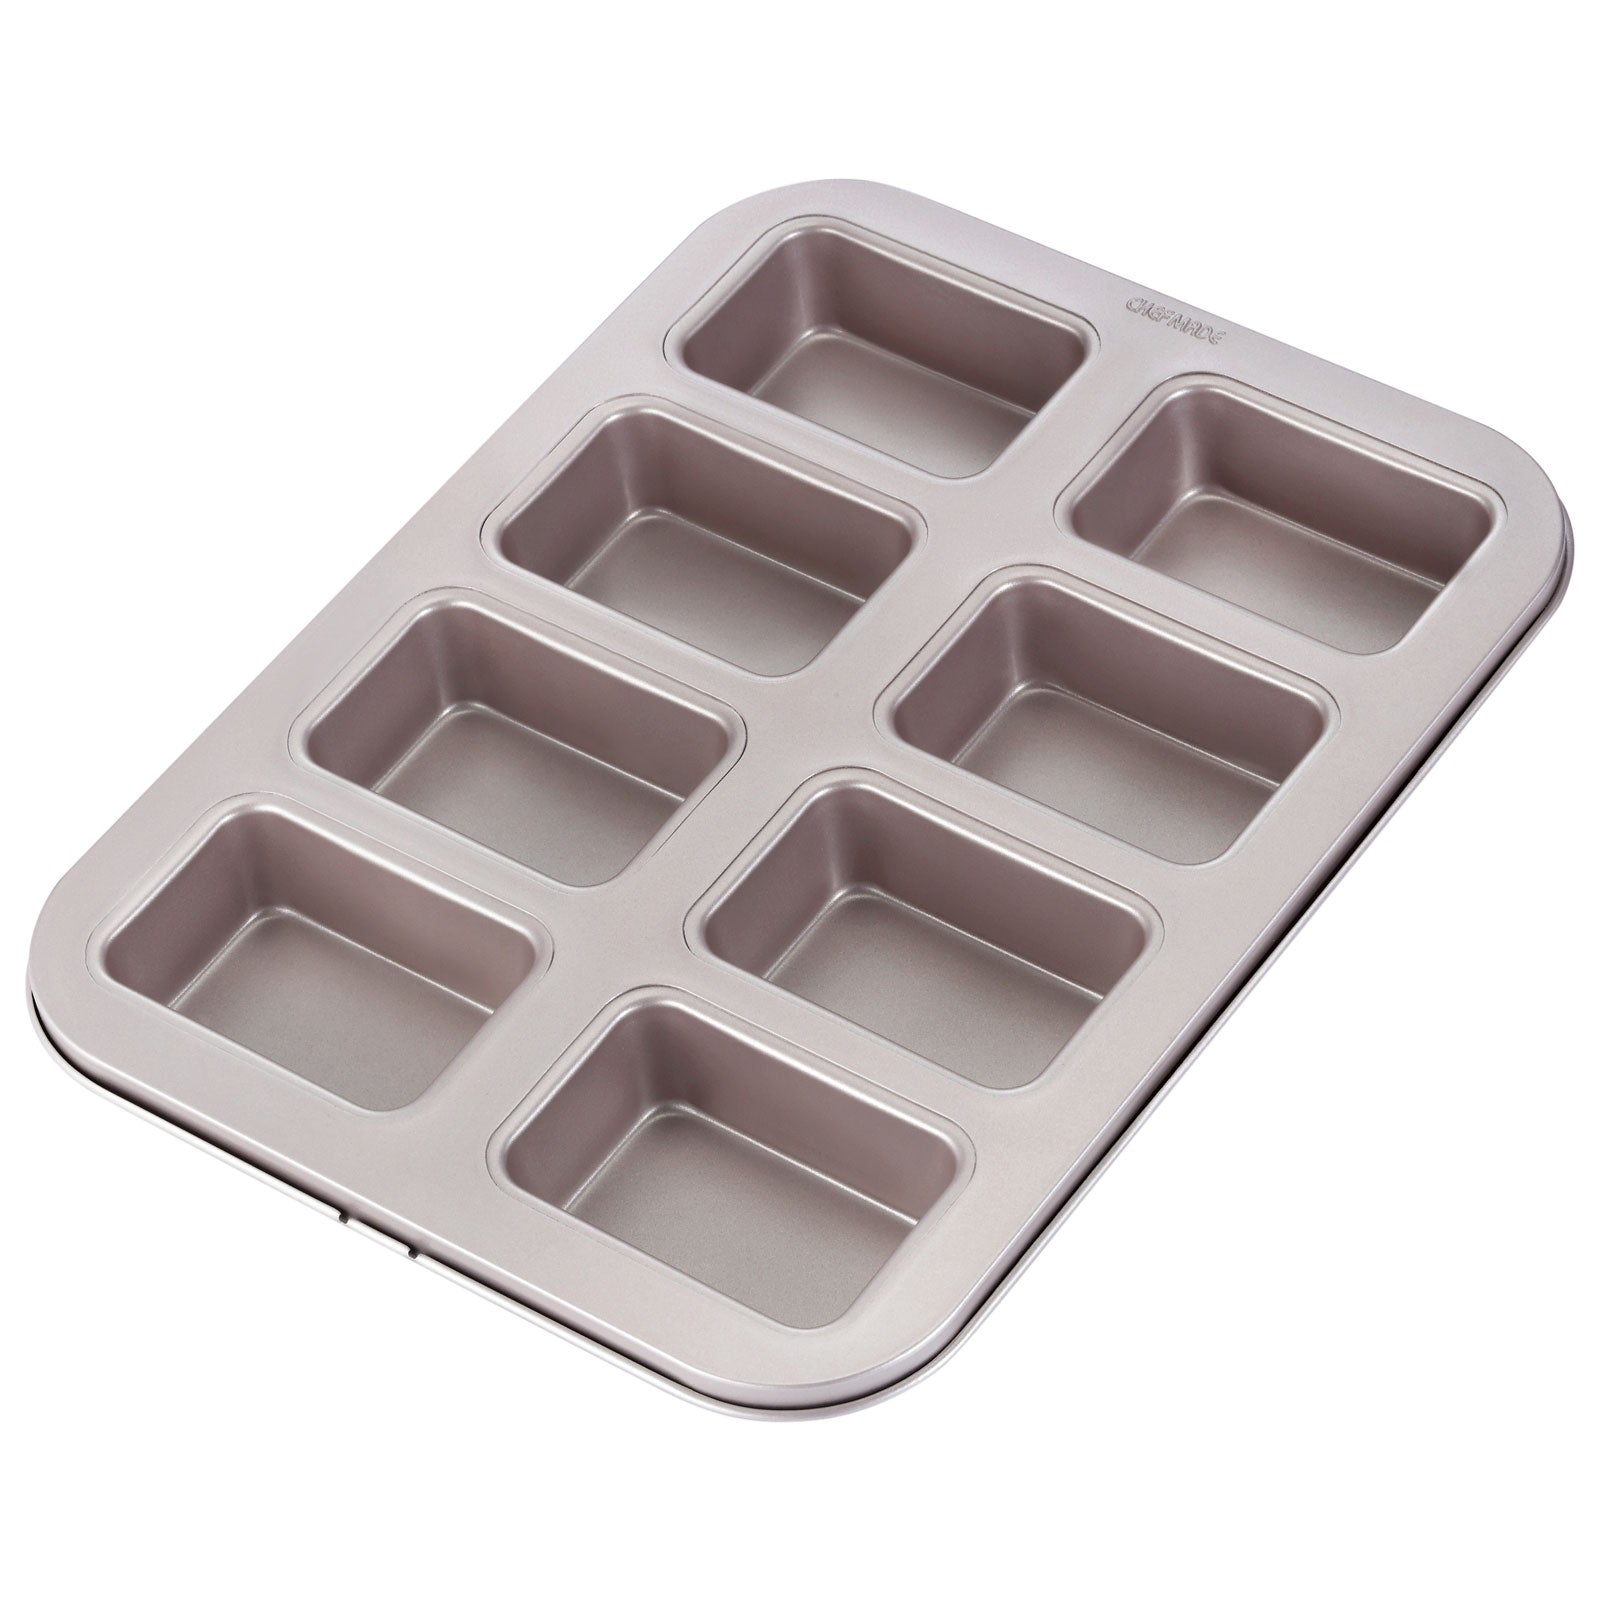 Brownie Cake Pan Rectangle 8 Well - CHEFMADE official store